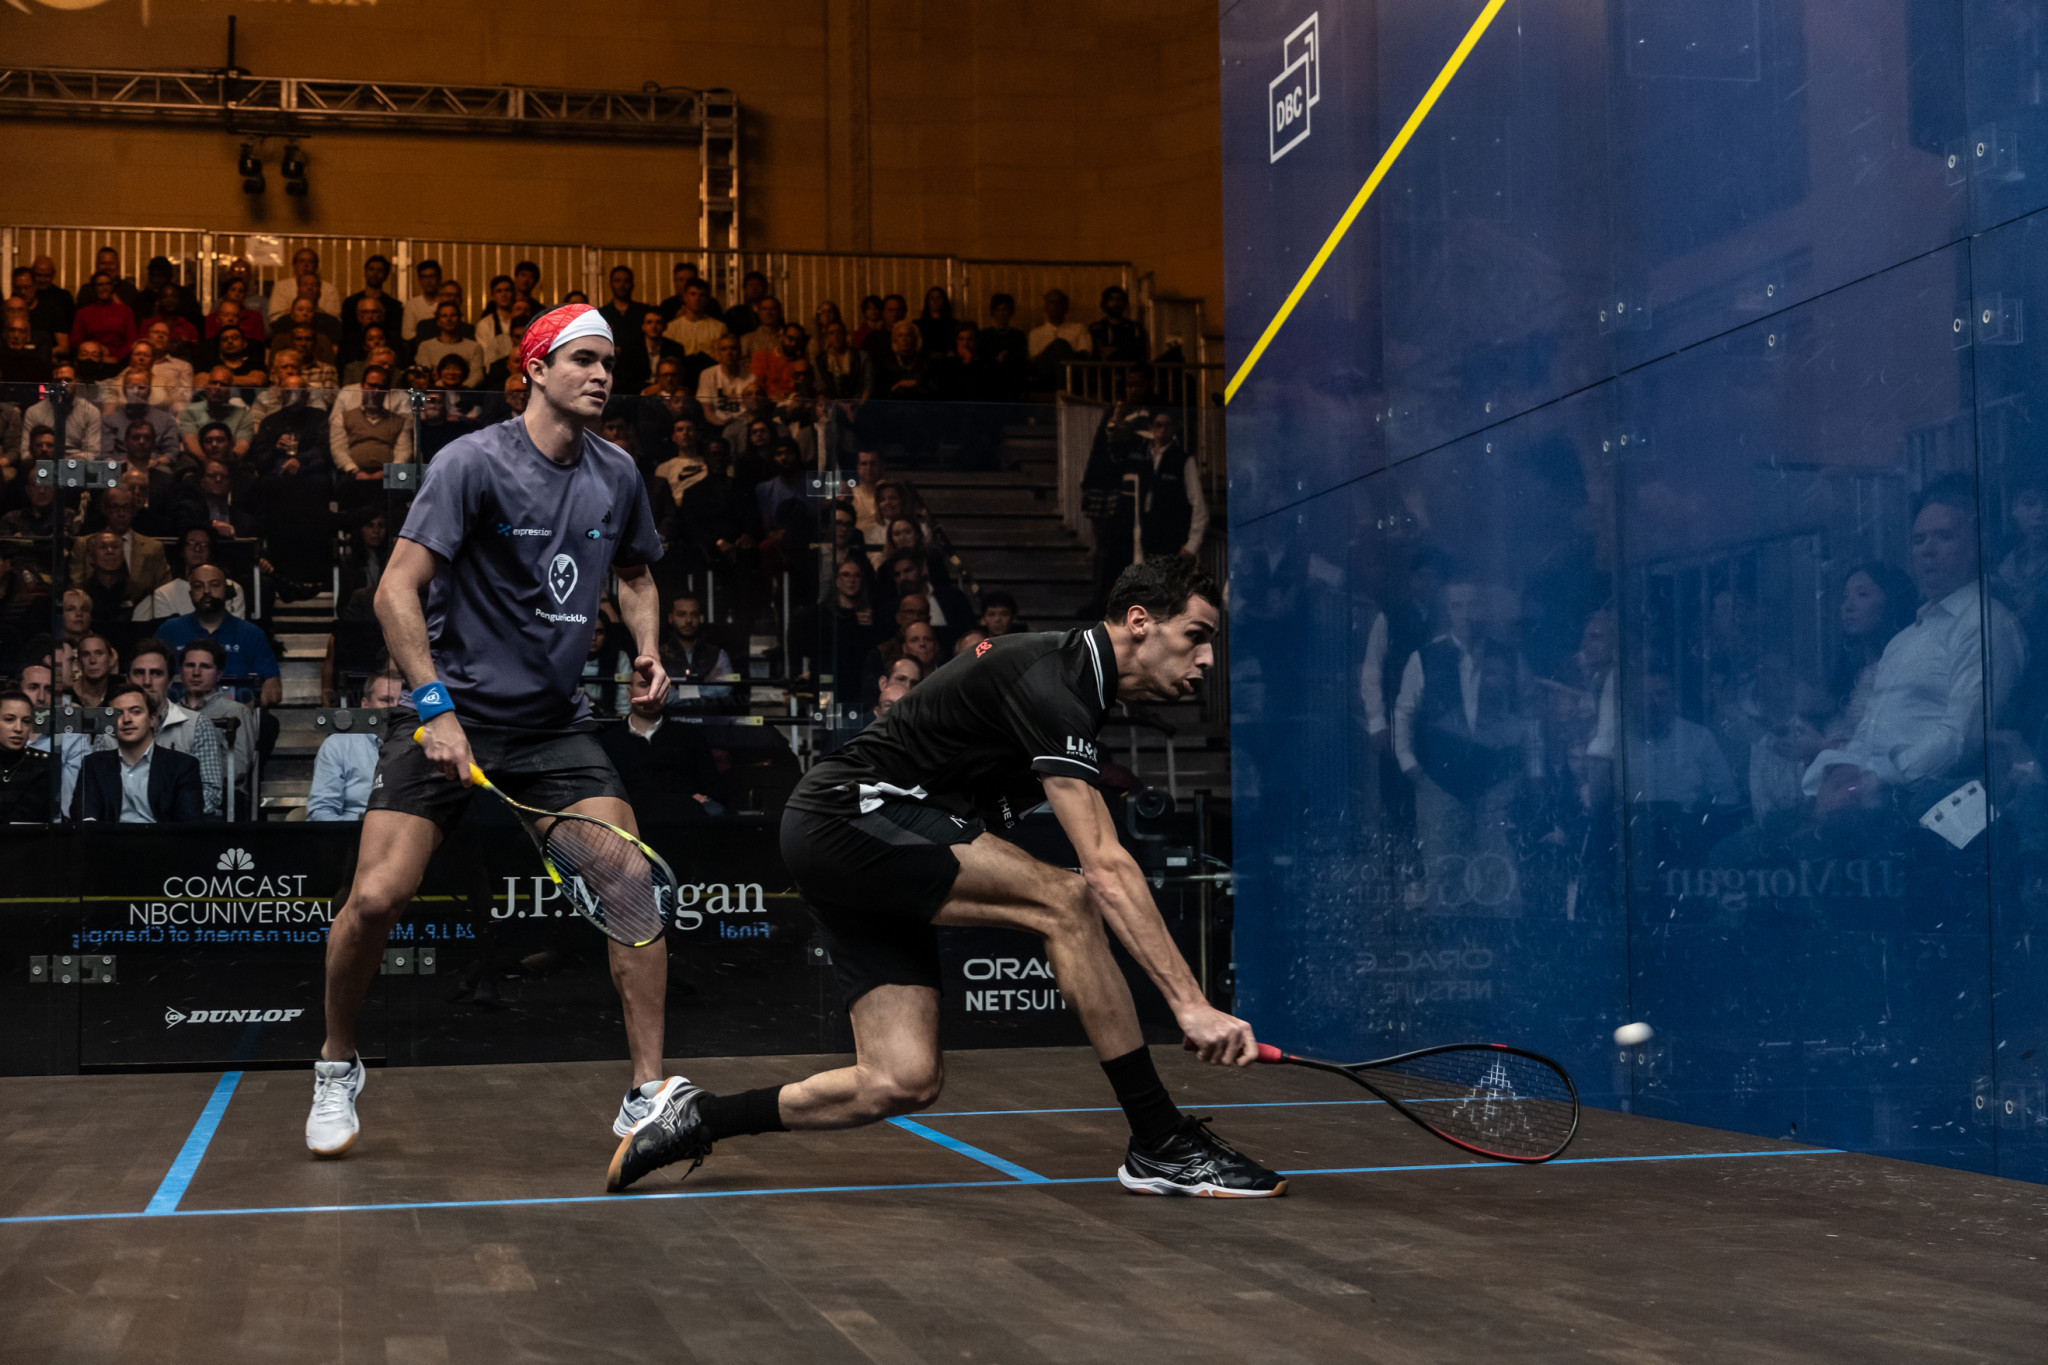 Ali Farag and Diego Elias at the final of the JP Morgan Tournament. PSA